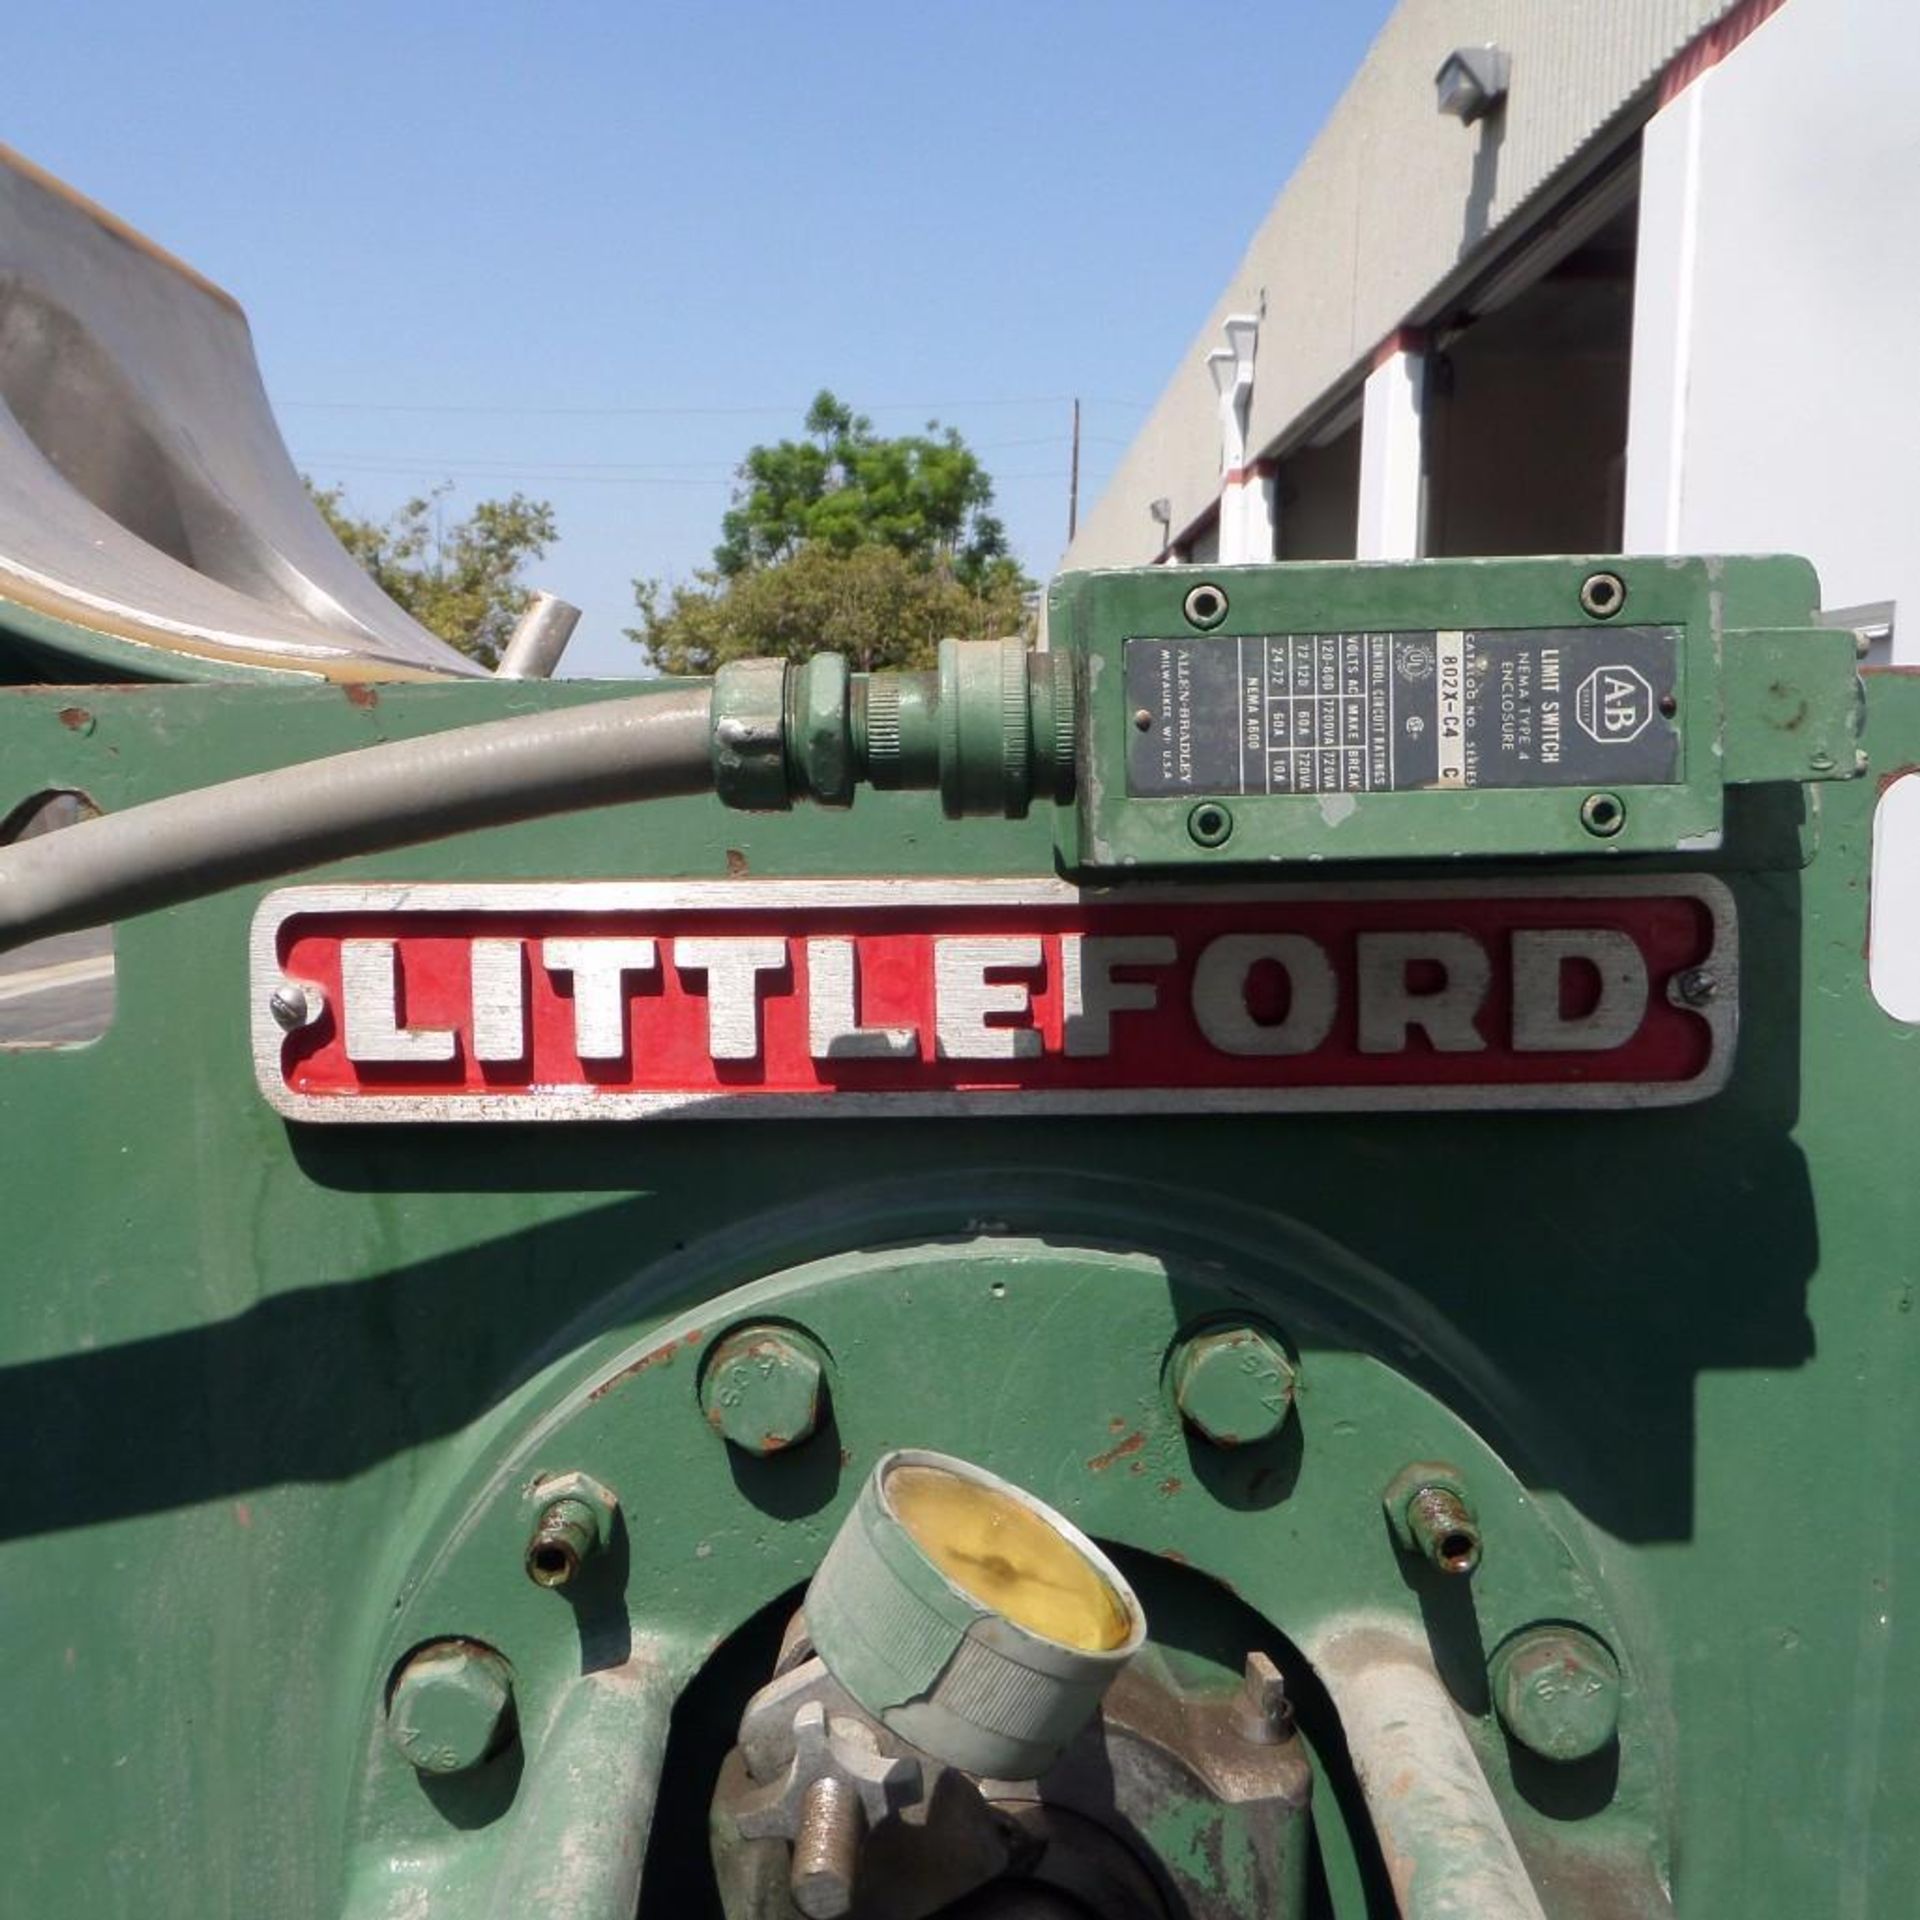 Littleford Day 130 Liter Stainless Steel High Intensity Mixer - Image 19 of 22